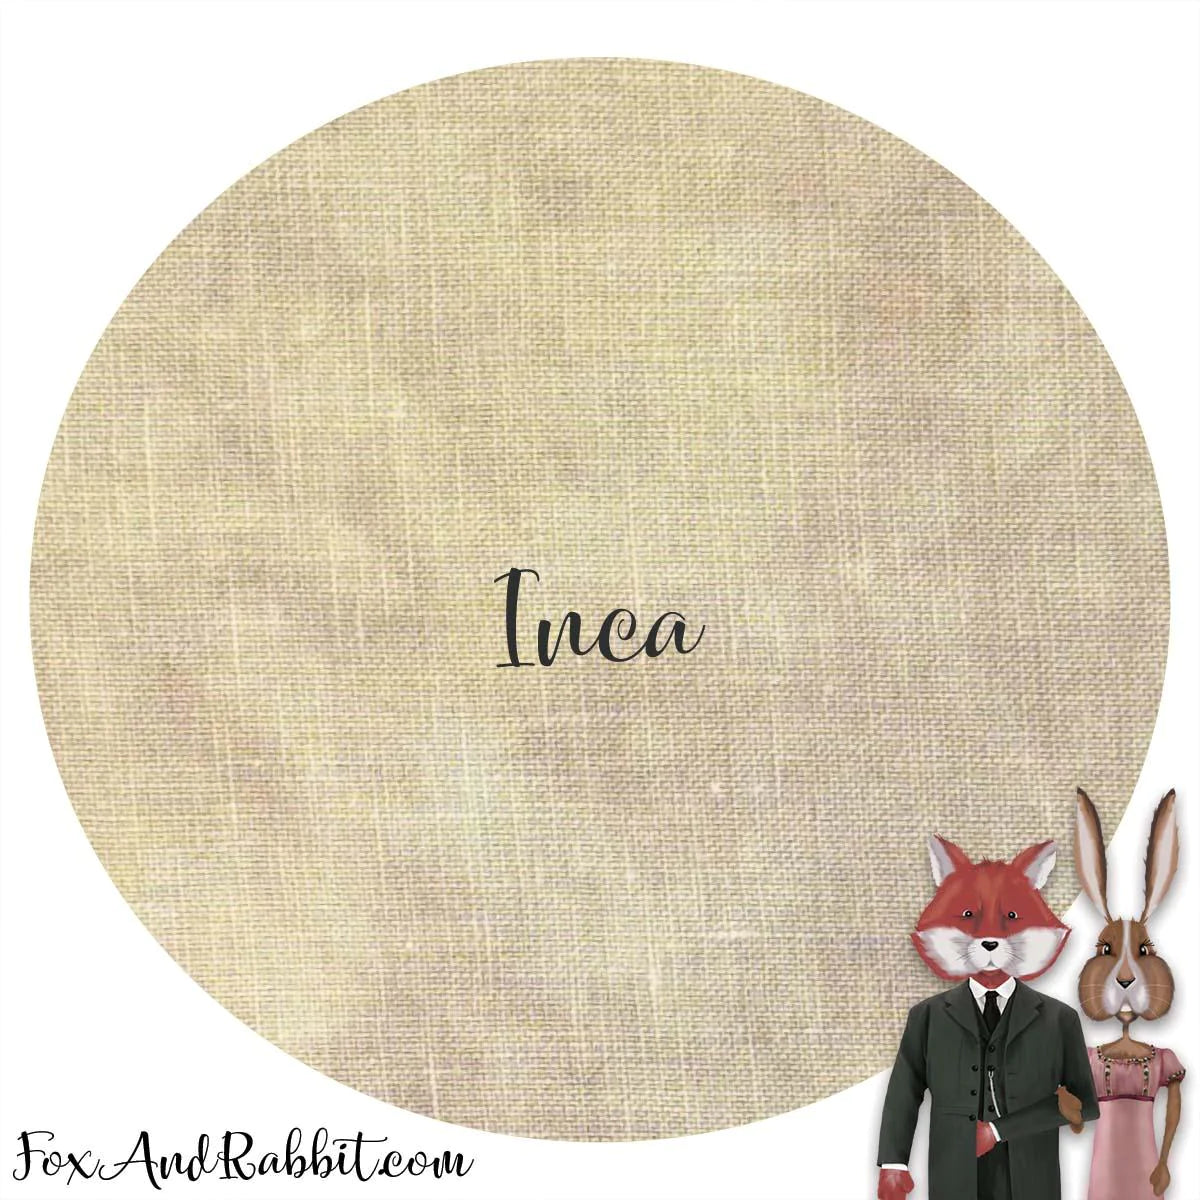 40 Count Linen - Inca - Fox and Rabbit, Fabric, The Crafty Grimalkin - A Cross Stitch Store